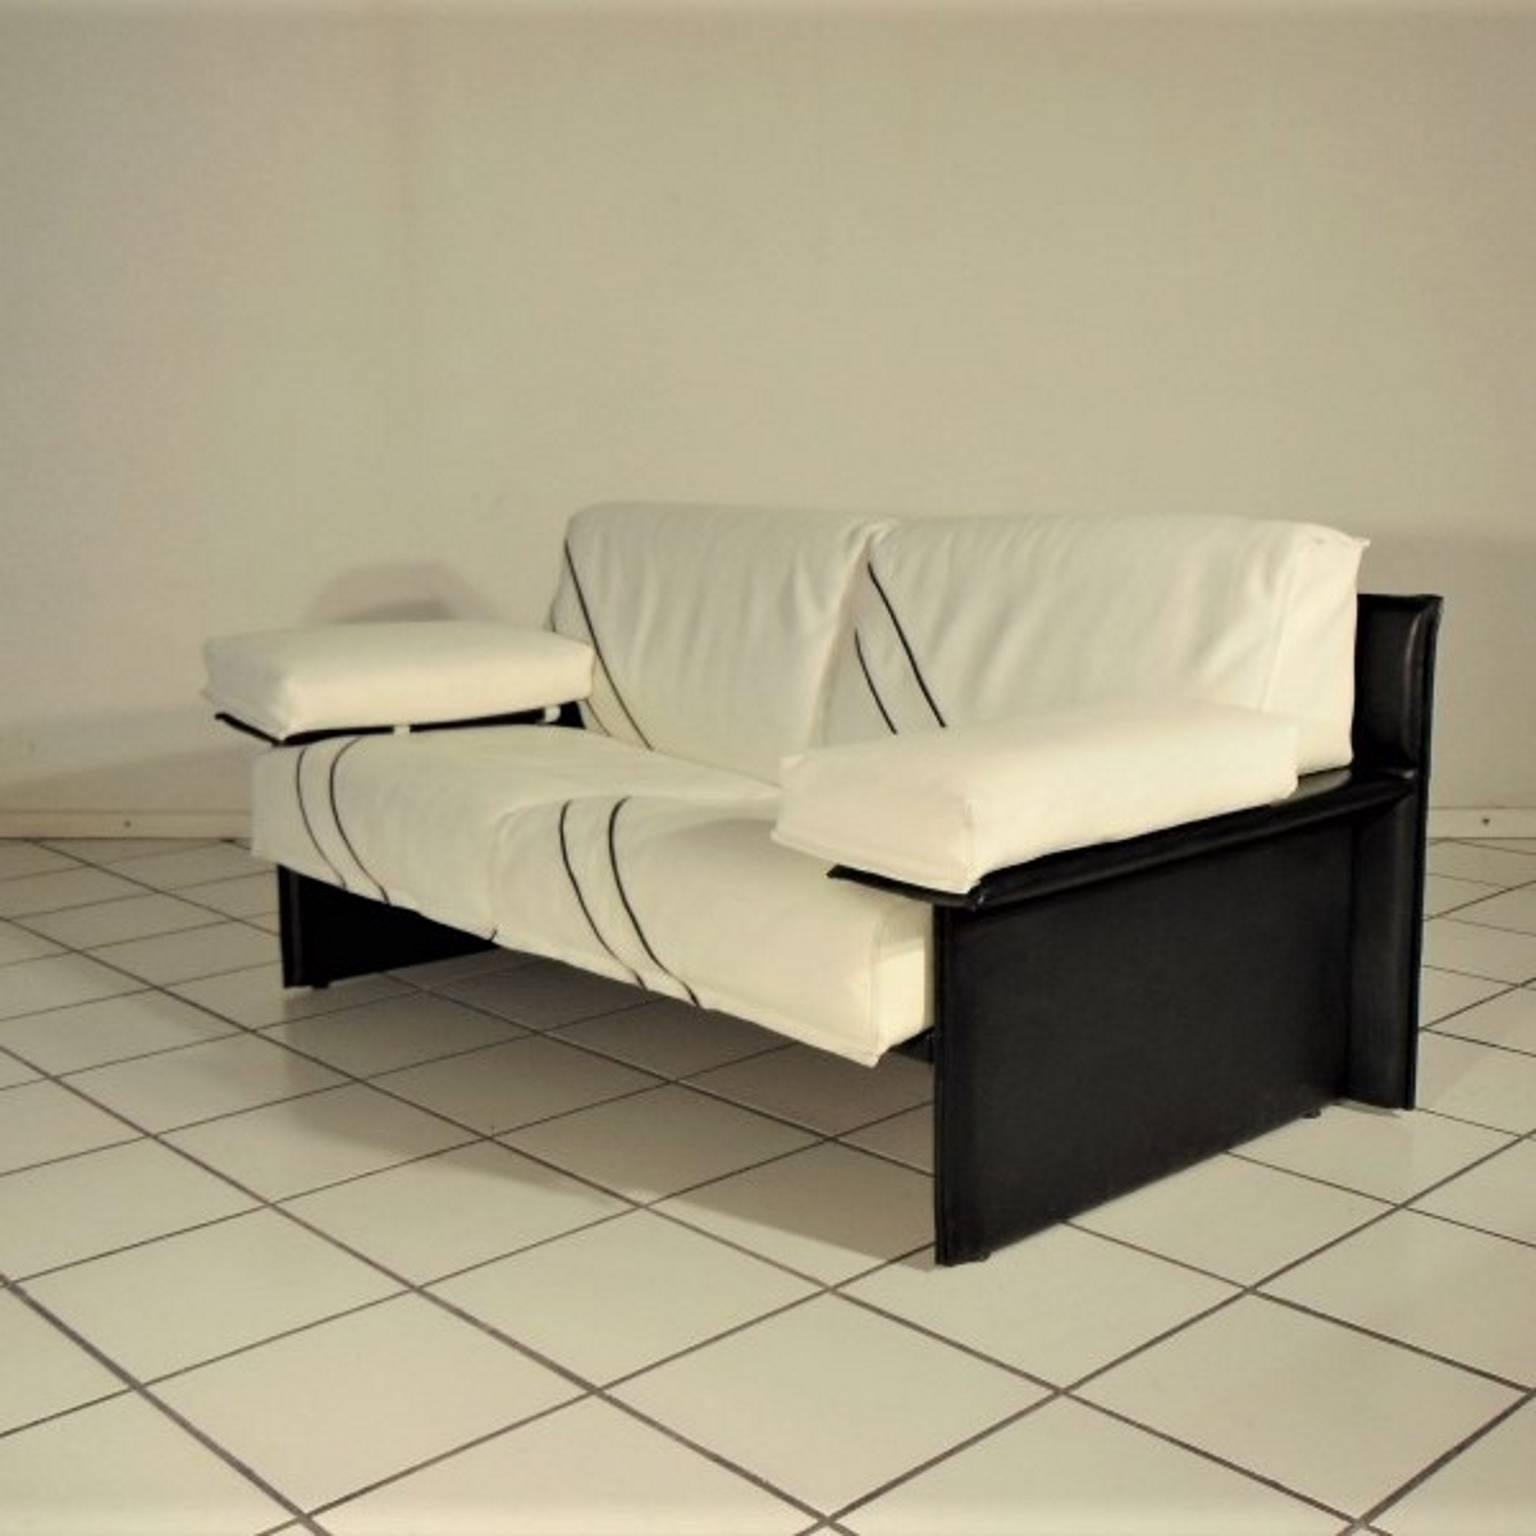 Dyed 1981 Sormani White Leather Two-Seater Sofa with Black Inlays and Structure Italy